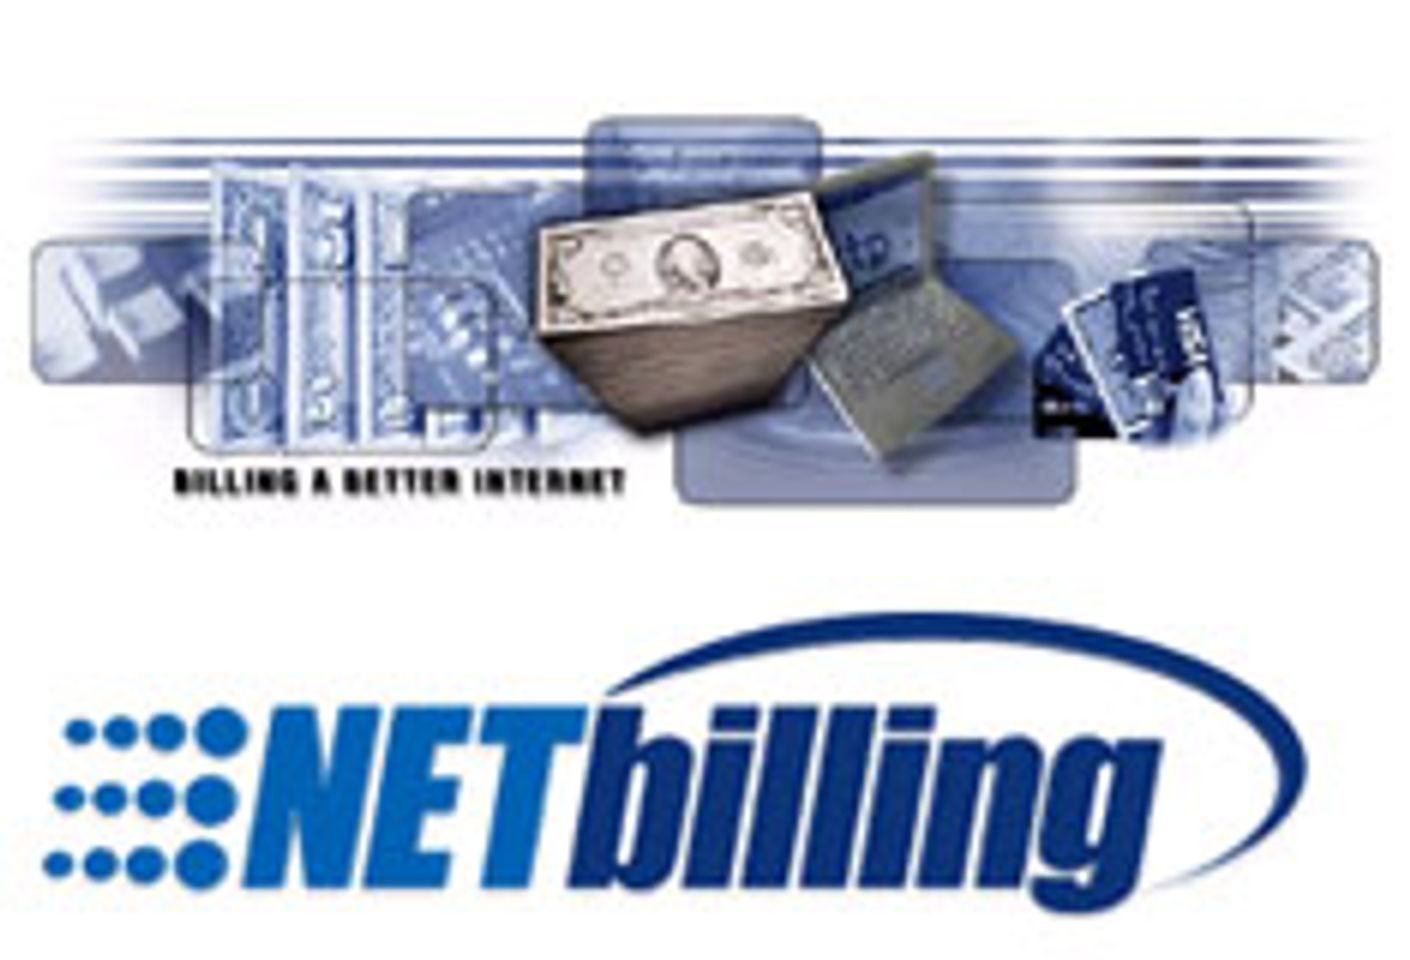 Netbilling Adds Features, Functionality - AVN Online